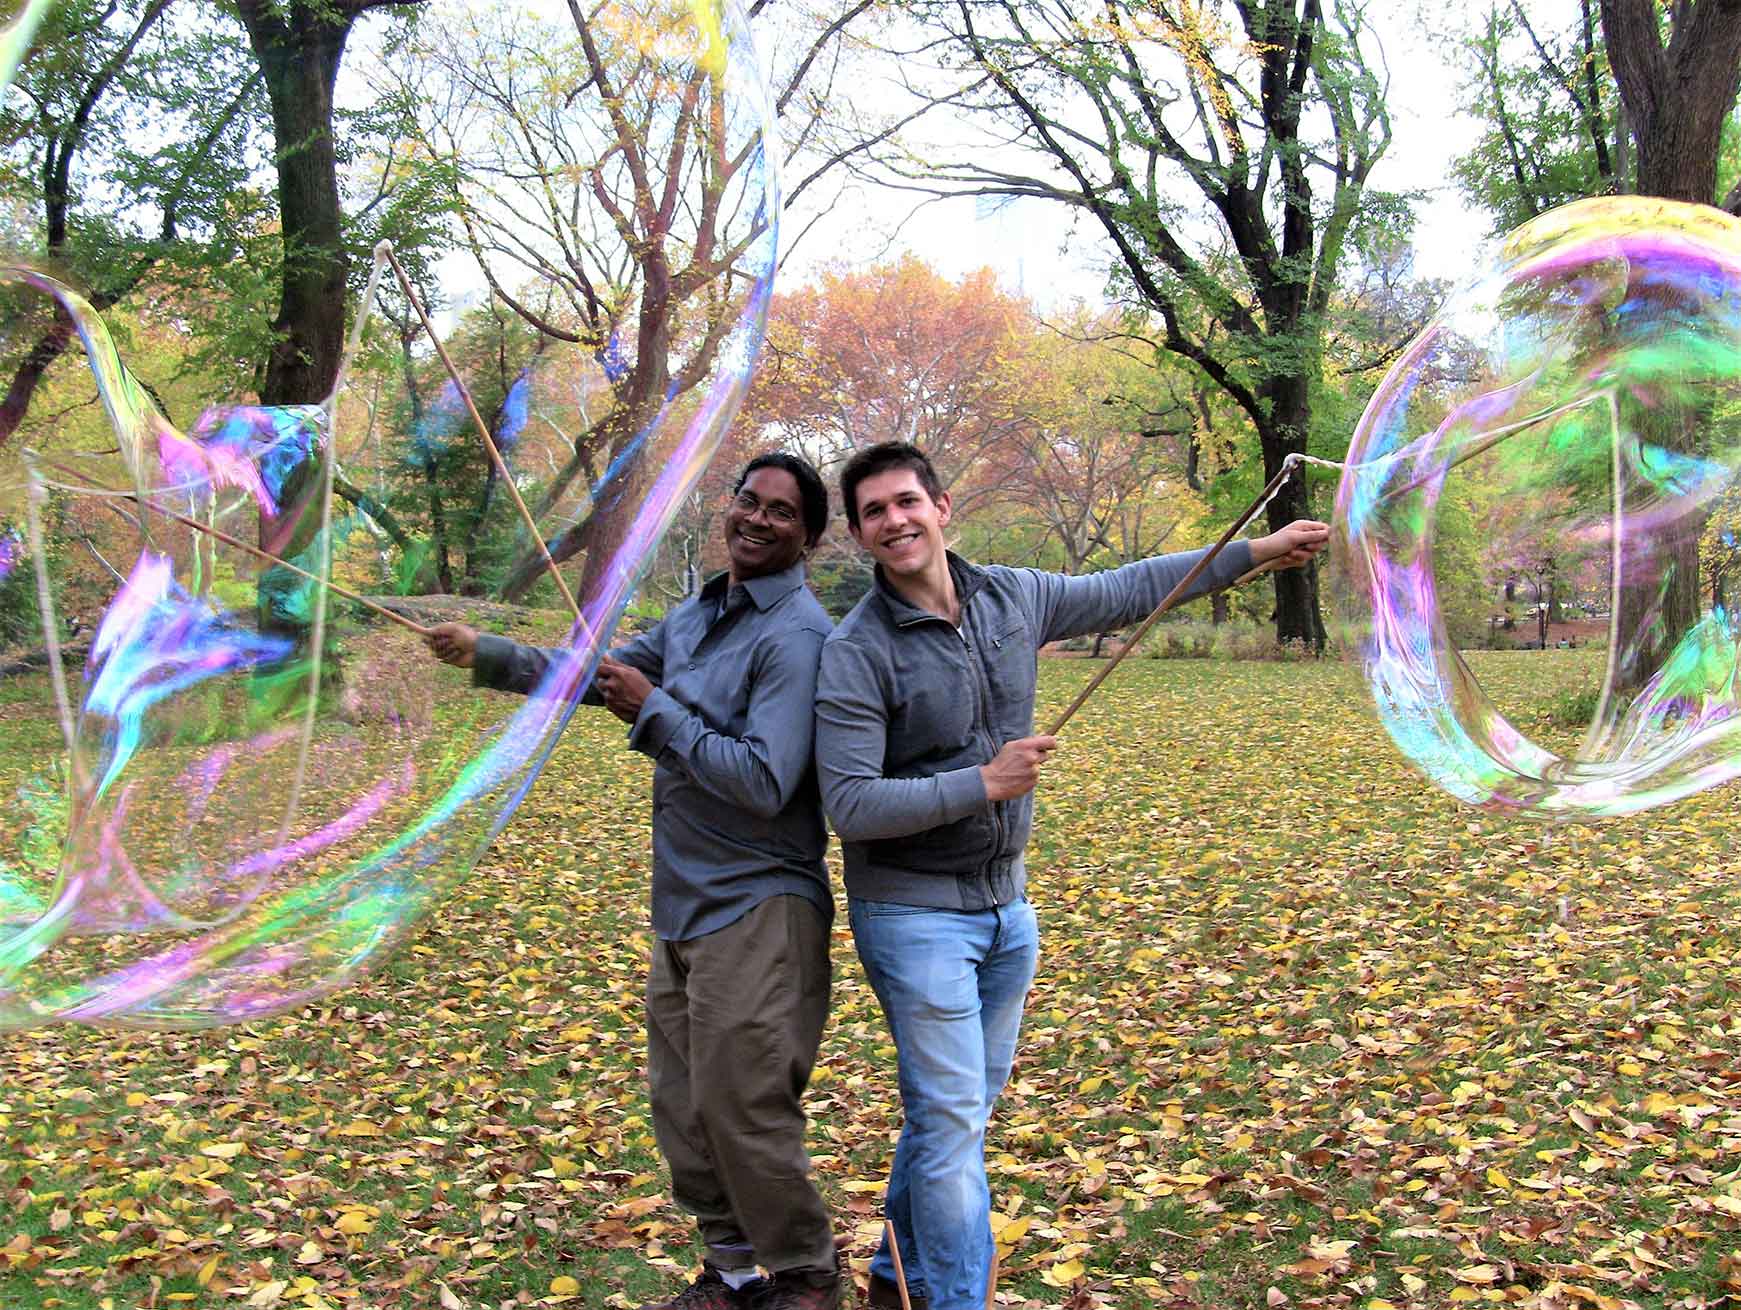 Two people making giant bubbles in an outdoor setting.